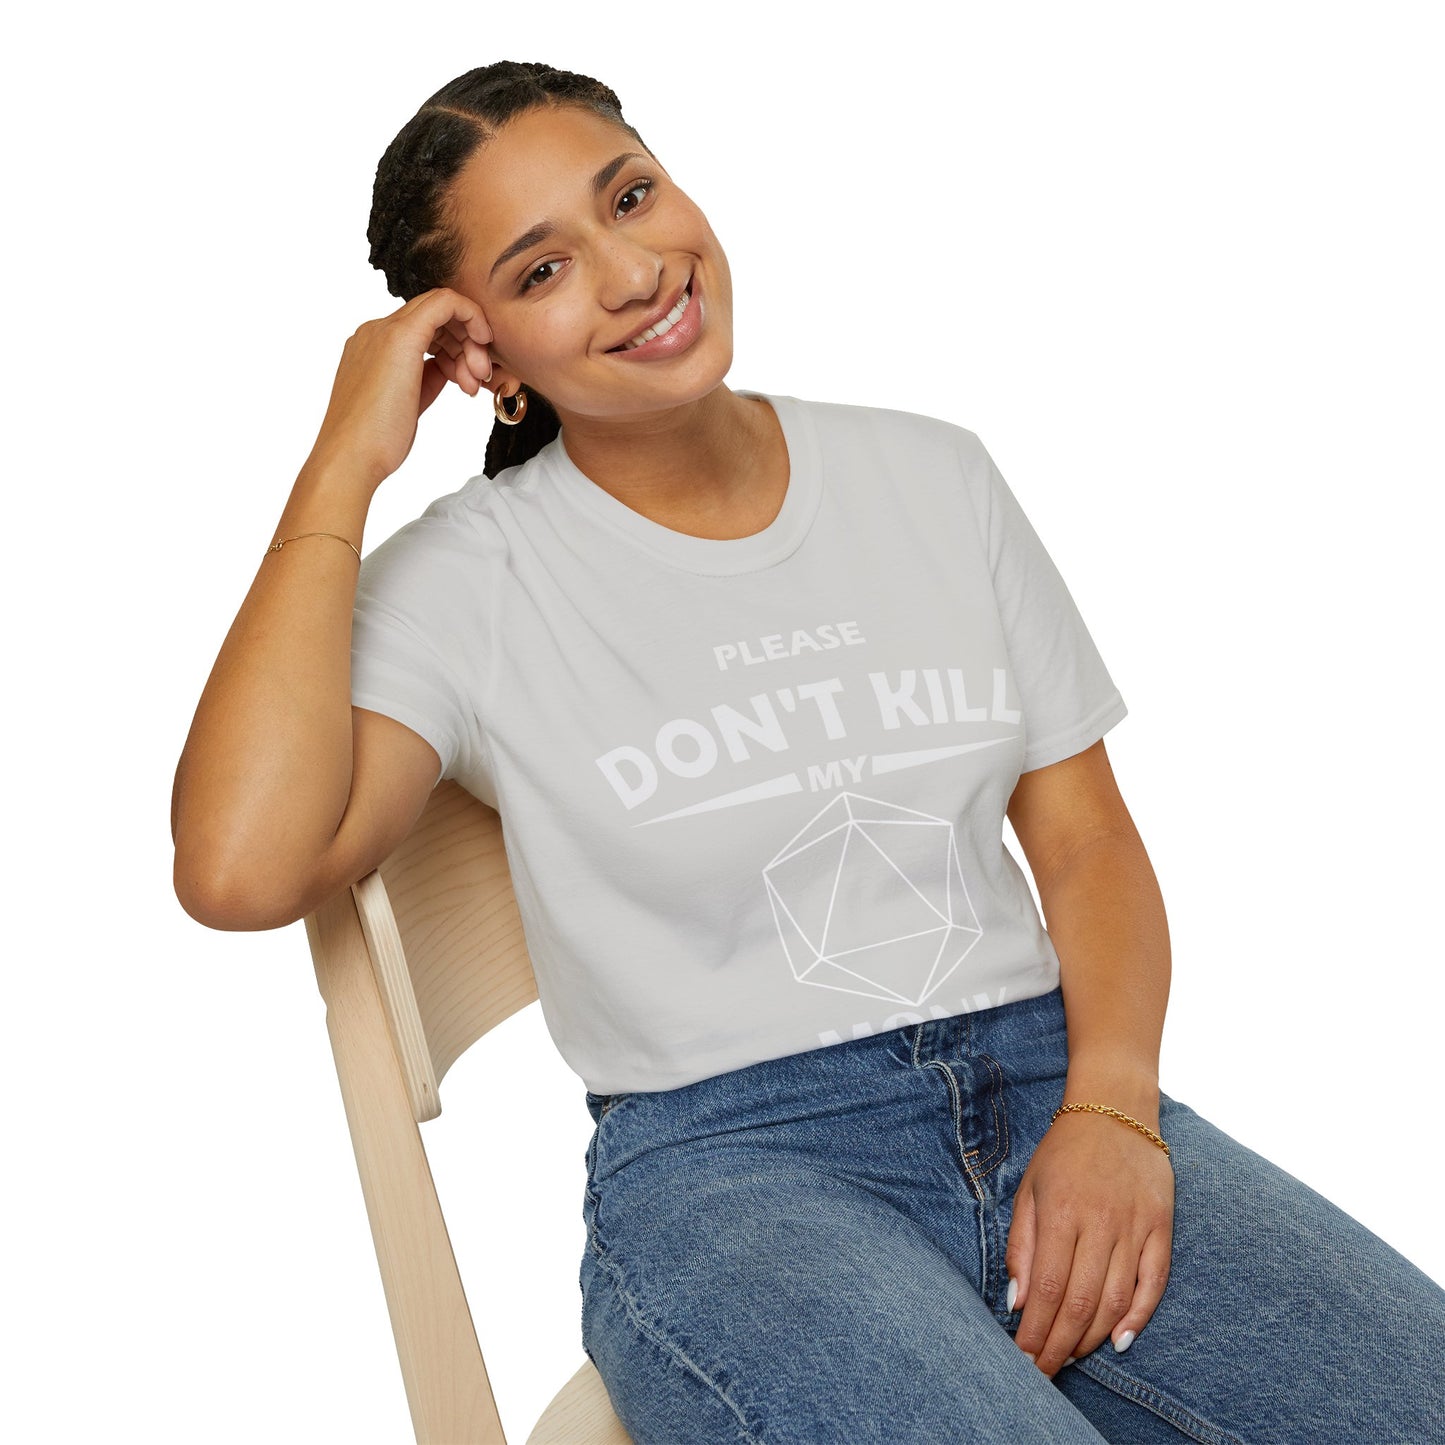 Please Don't Kill My Monk - White - Unisex Softstyle T-Shirt